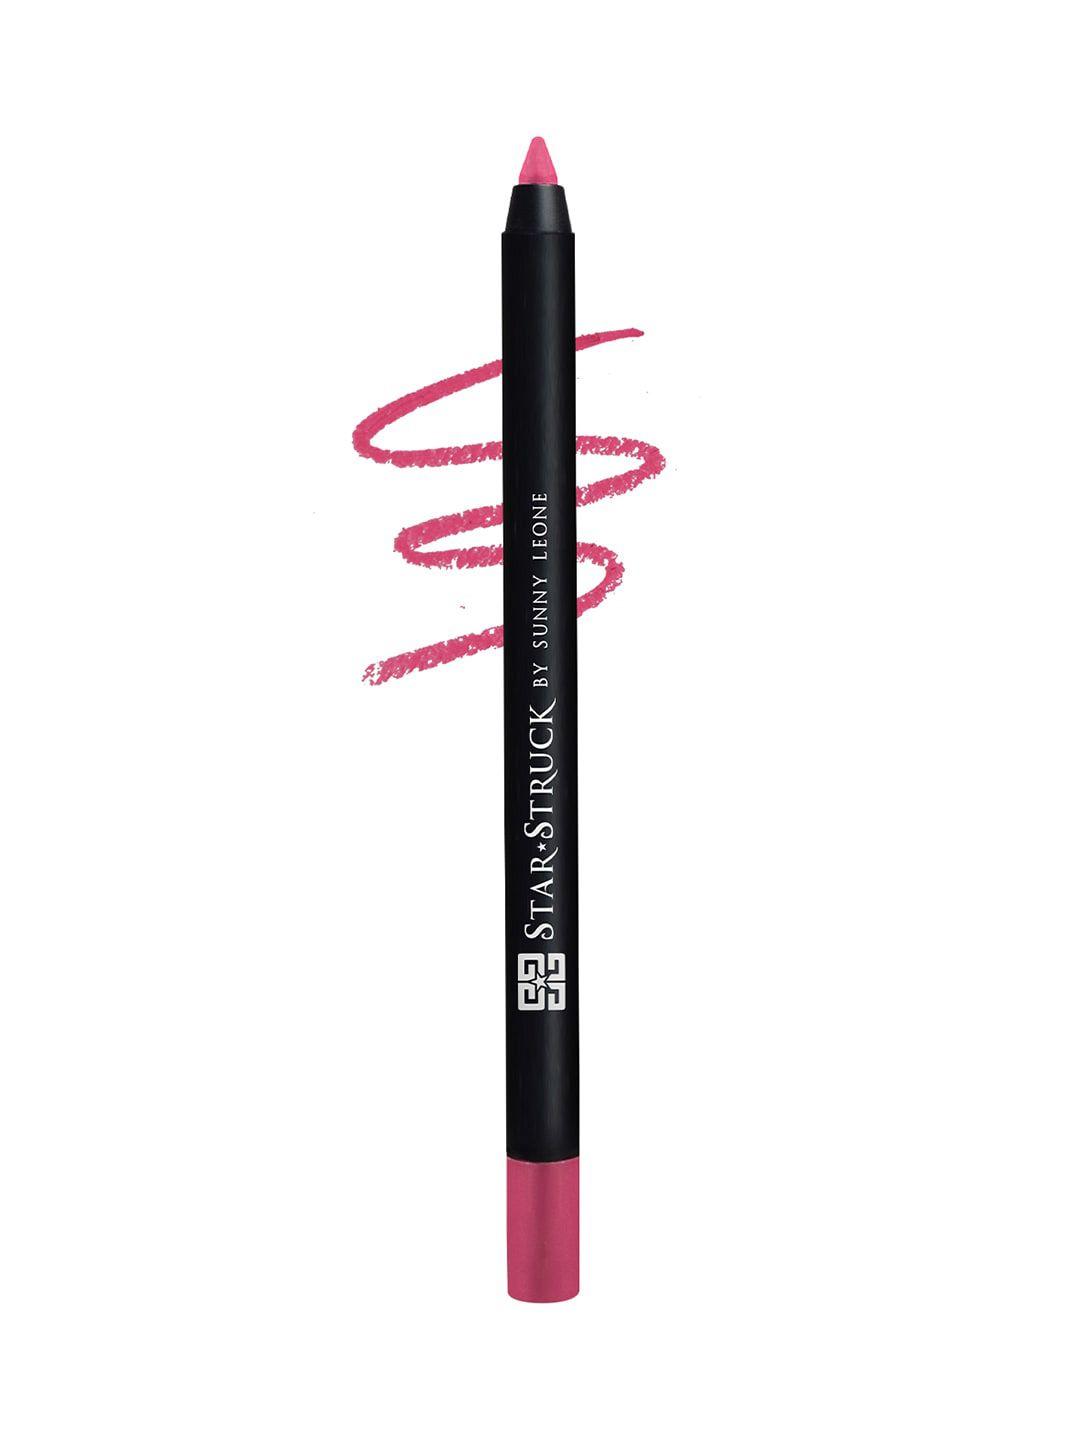 star struck by sunny leone make your lips pop water resistant long wear lip liner - kiss me pink